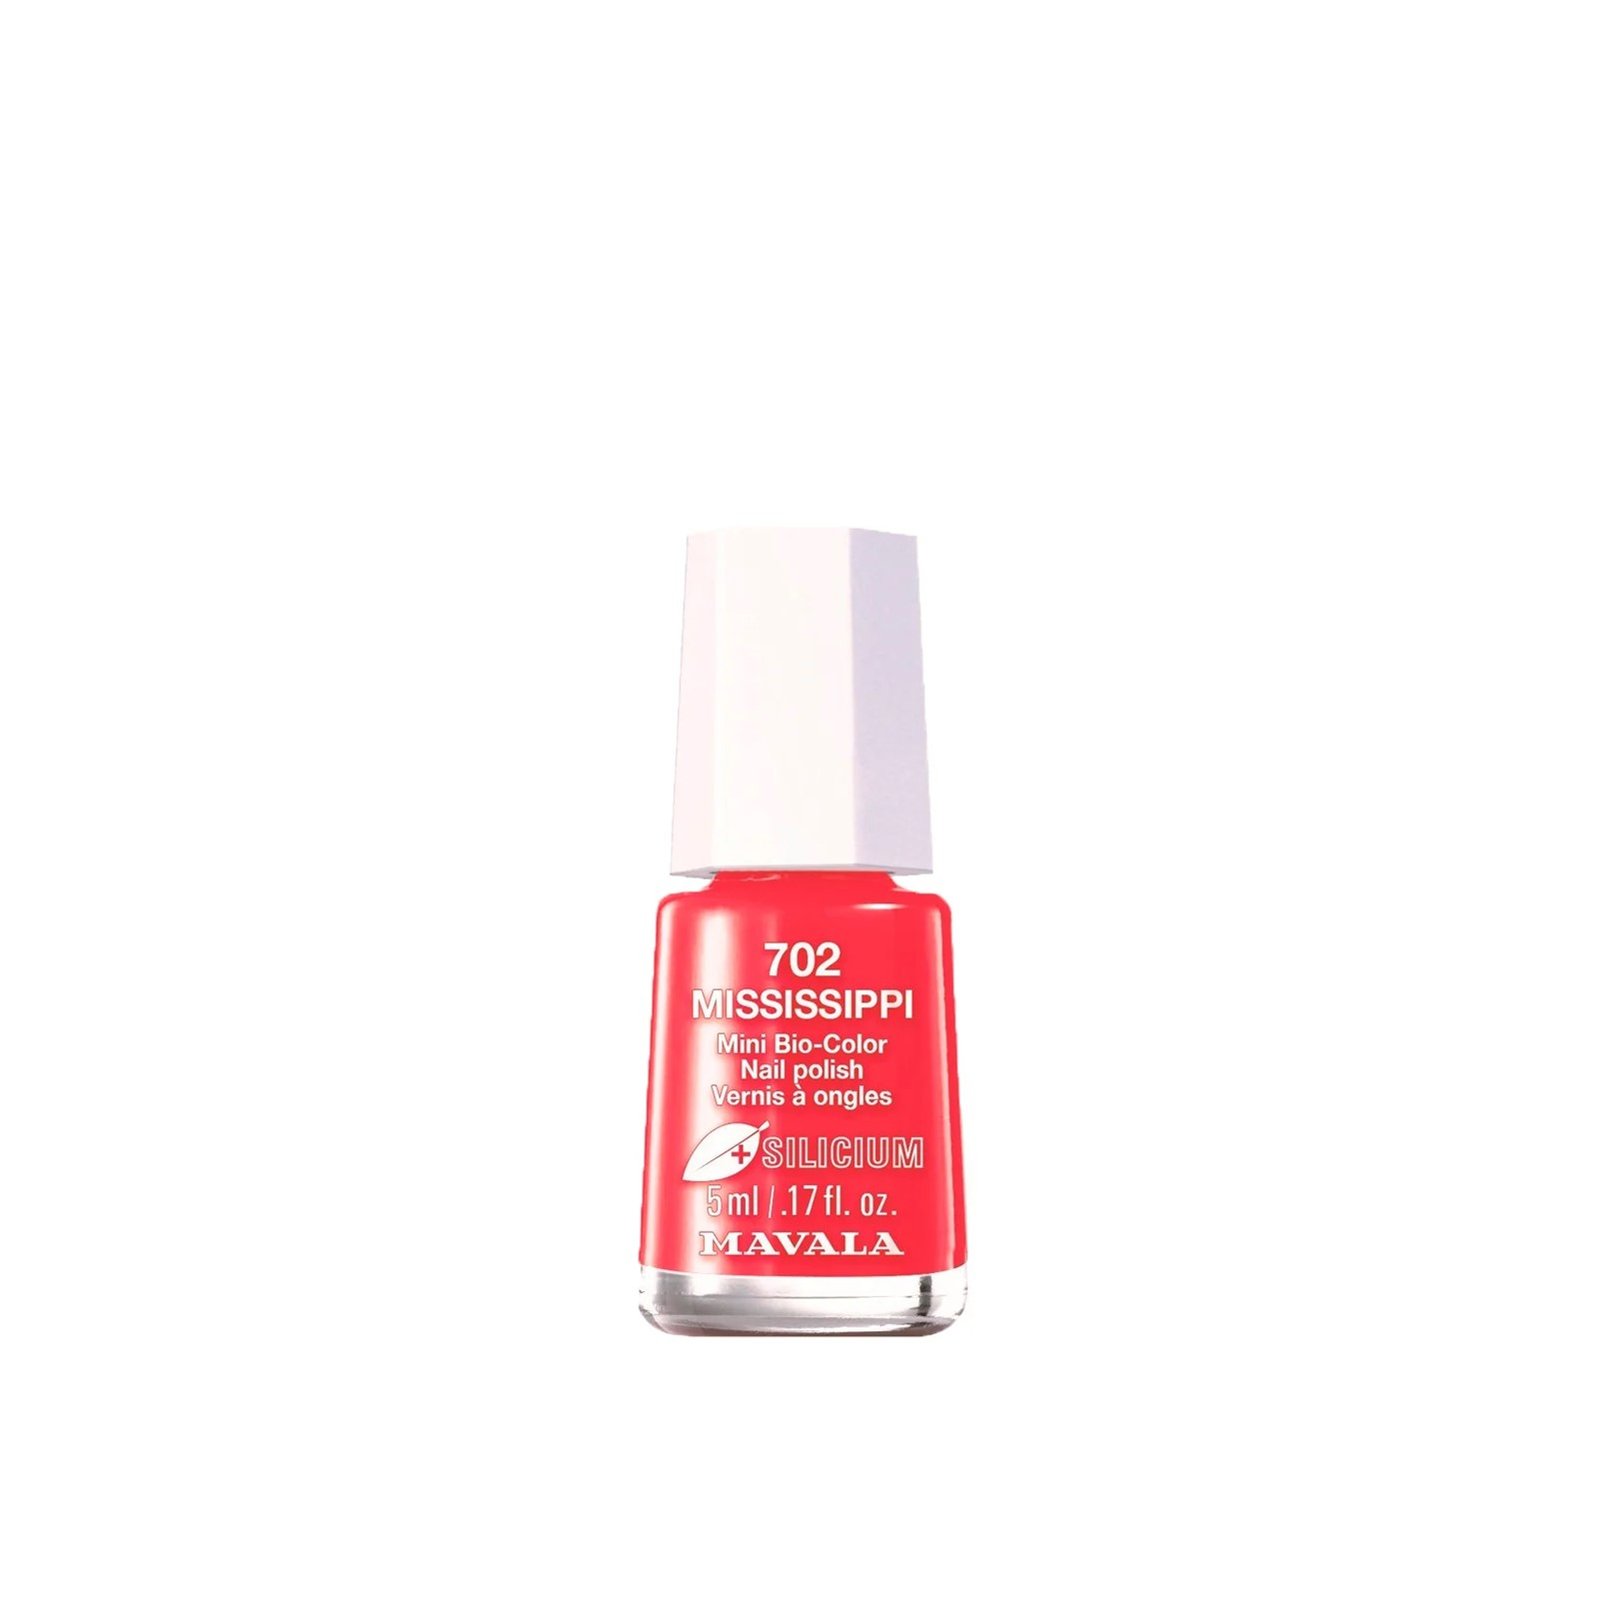 MINI BIO-COLOR'S - VERNIS A ONGLES MAVALA, maquille vos ongles